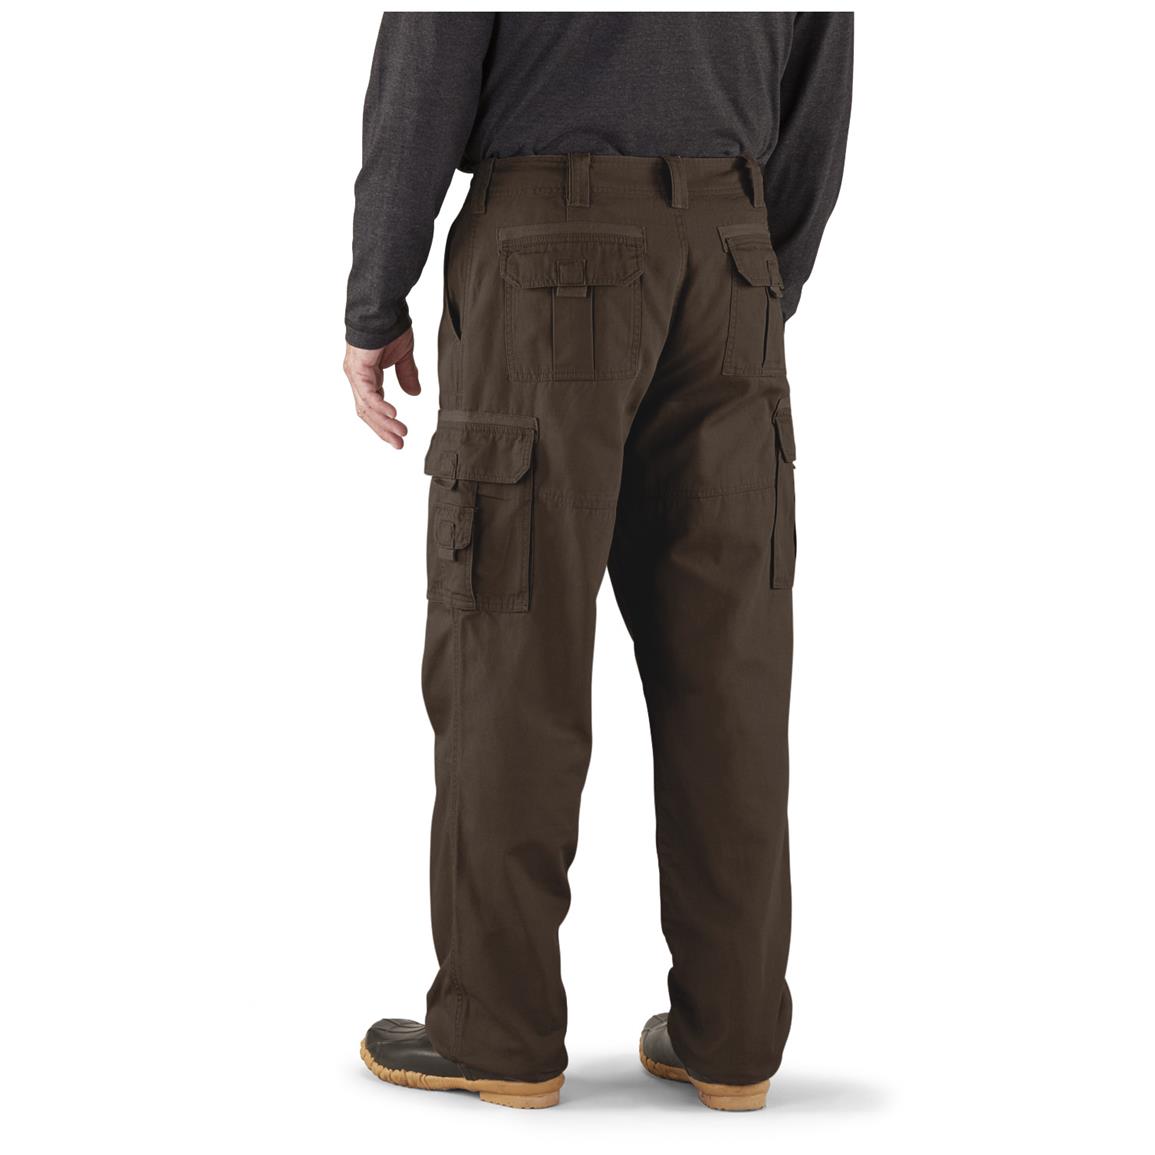 Men's Cargo Pants, Flannel Lined - 224165, Insulated Pants, Overalls ...